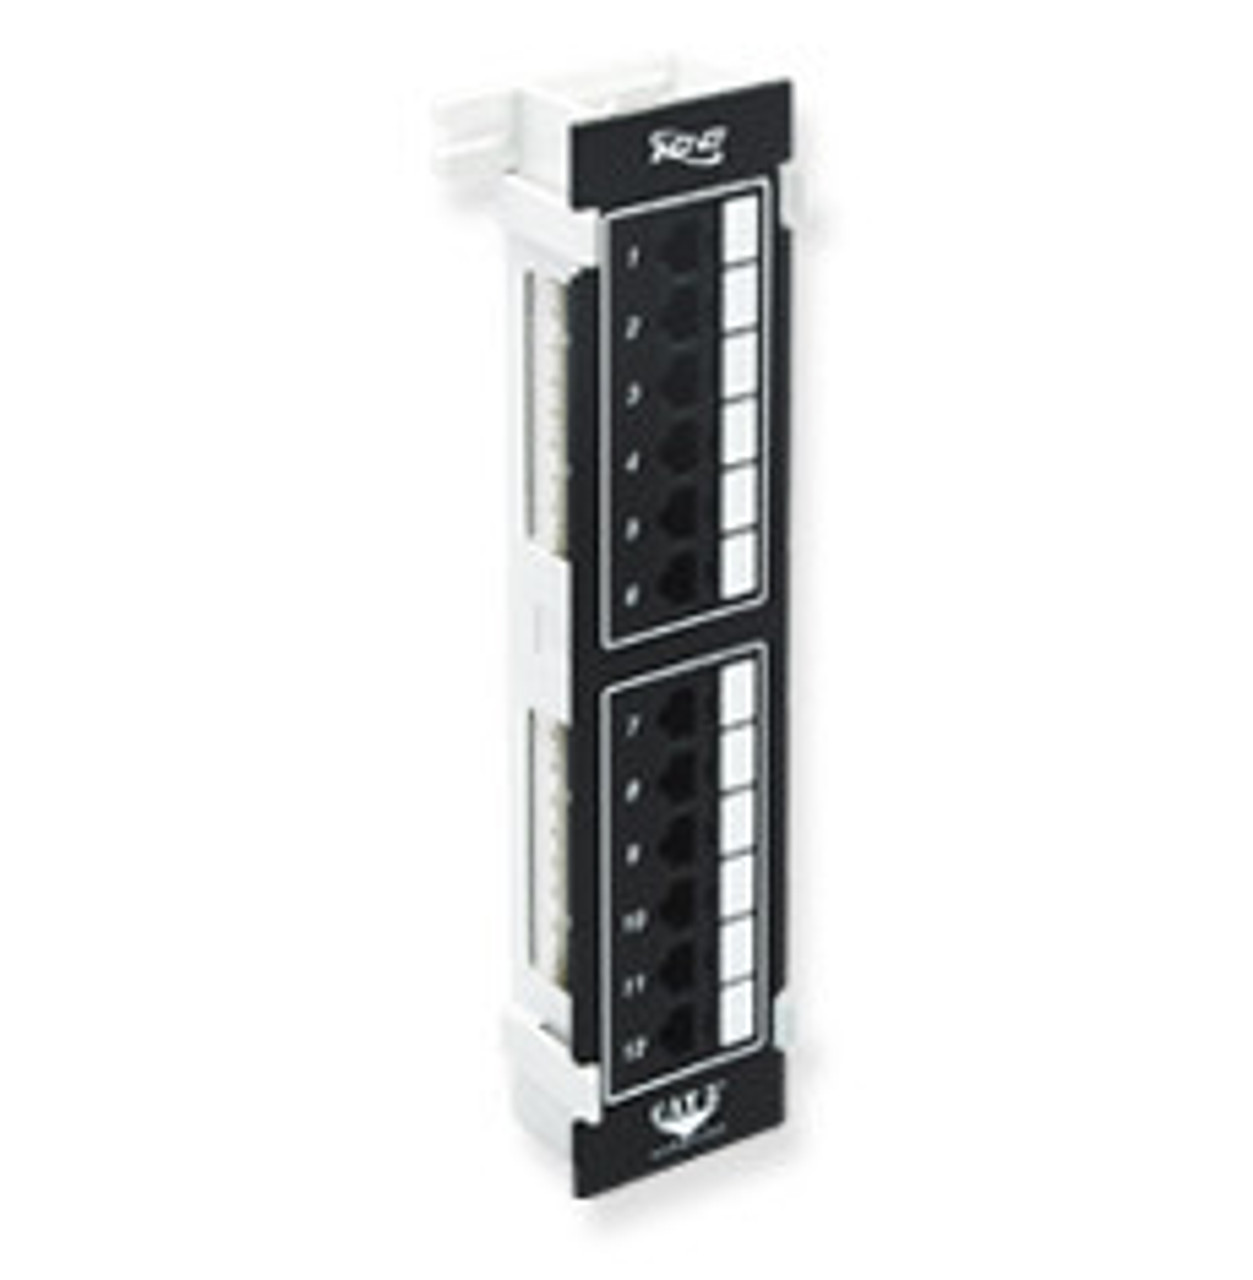 CAT6 Patch Panel with 24 Ports and 1 RMS in 6-Pack - ICC